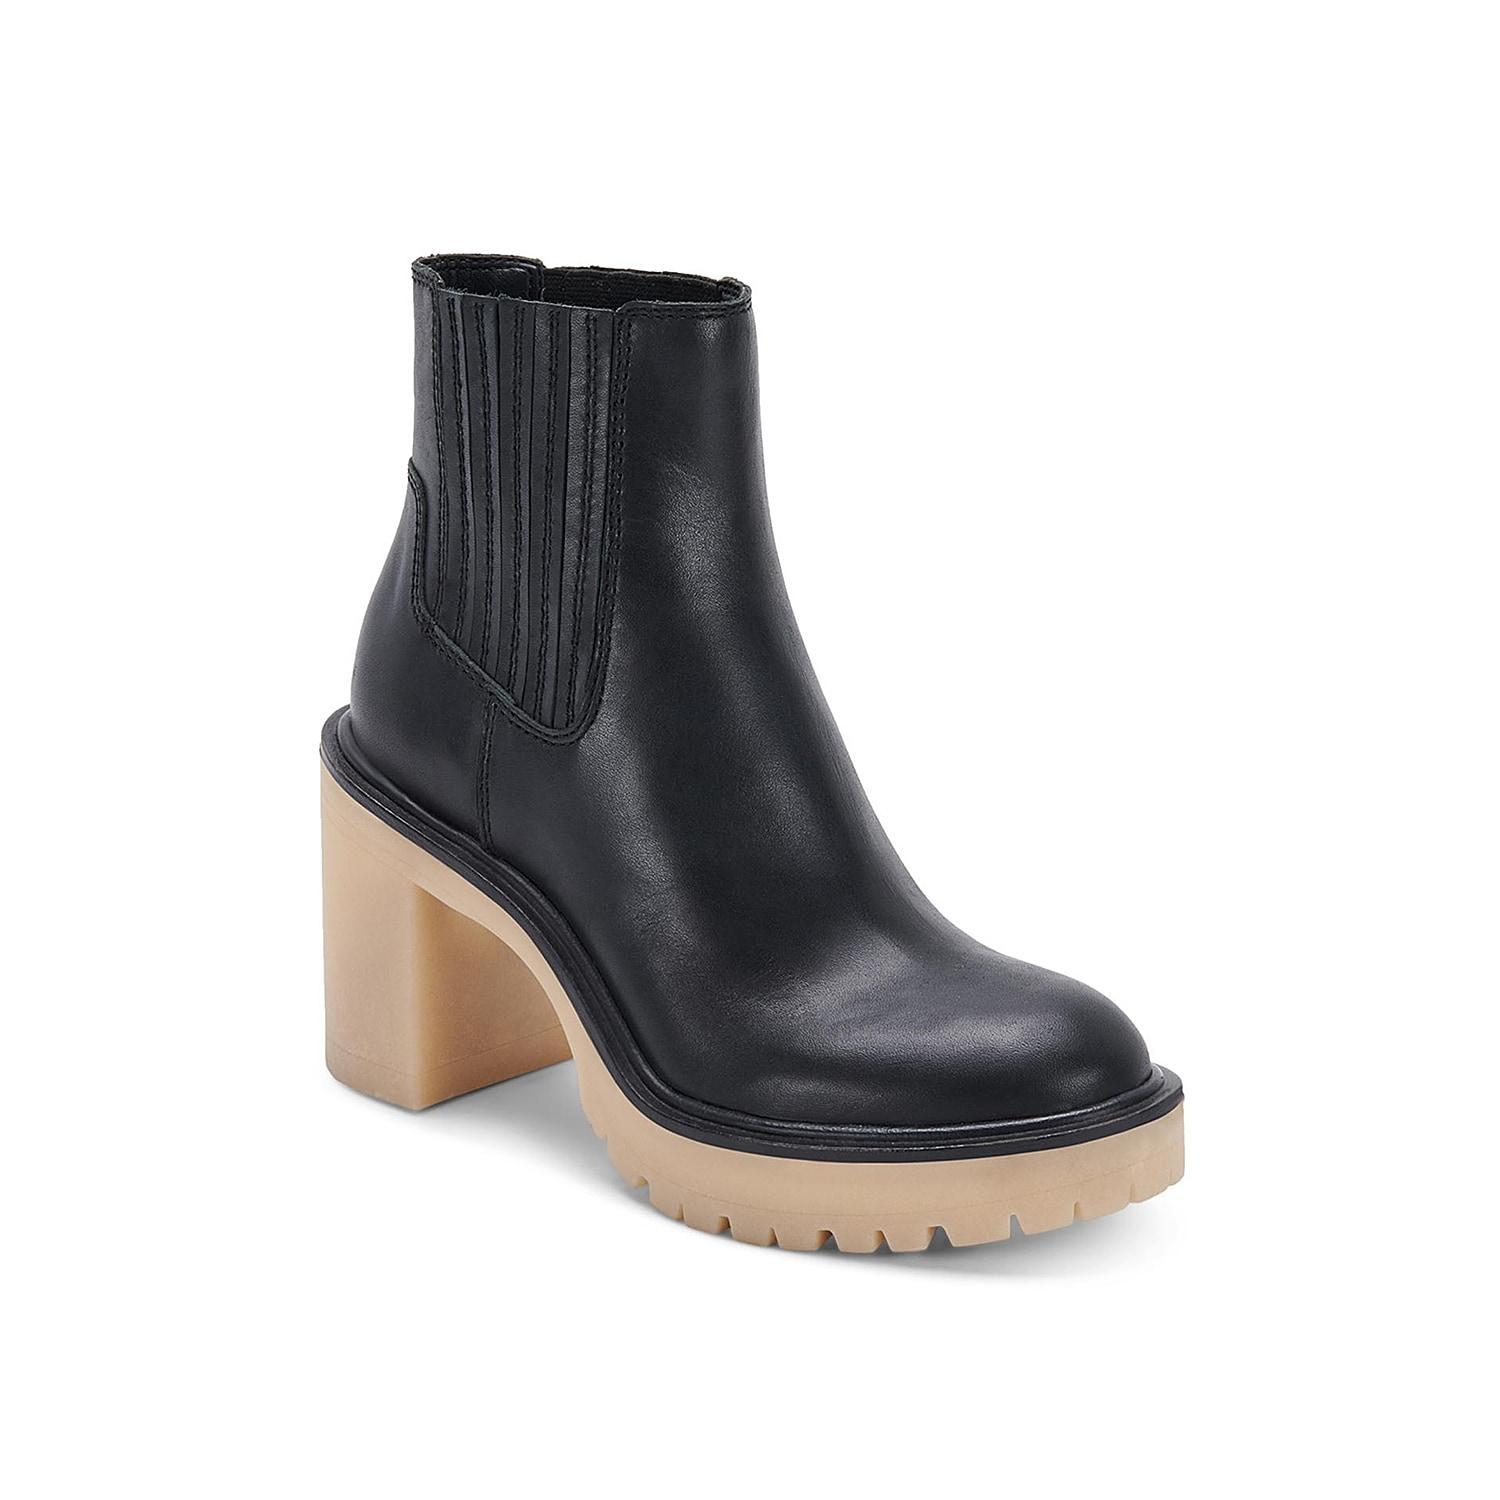 Dolce Vita Caster H2O Water Repellent Suede Lug Sole Platform Chelsea Booties Product Image